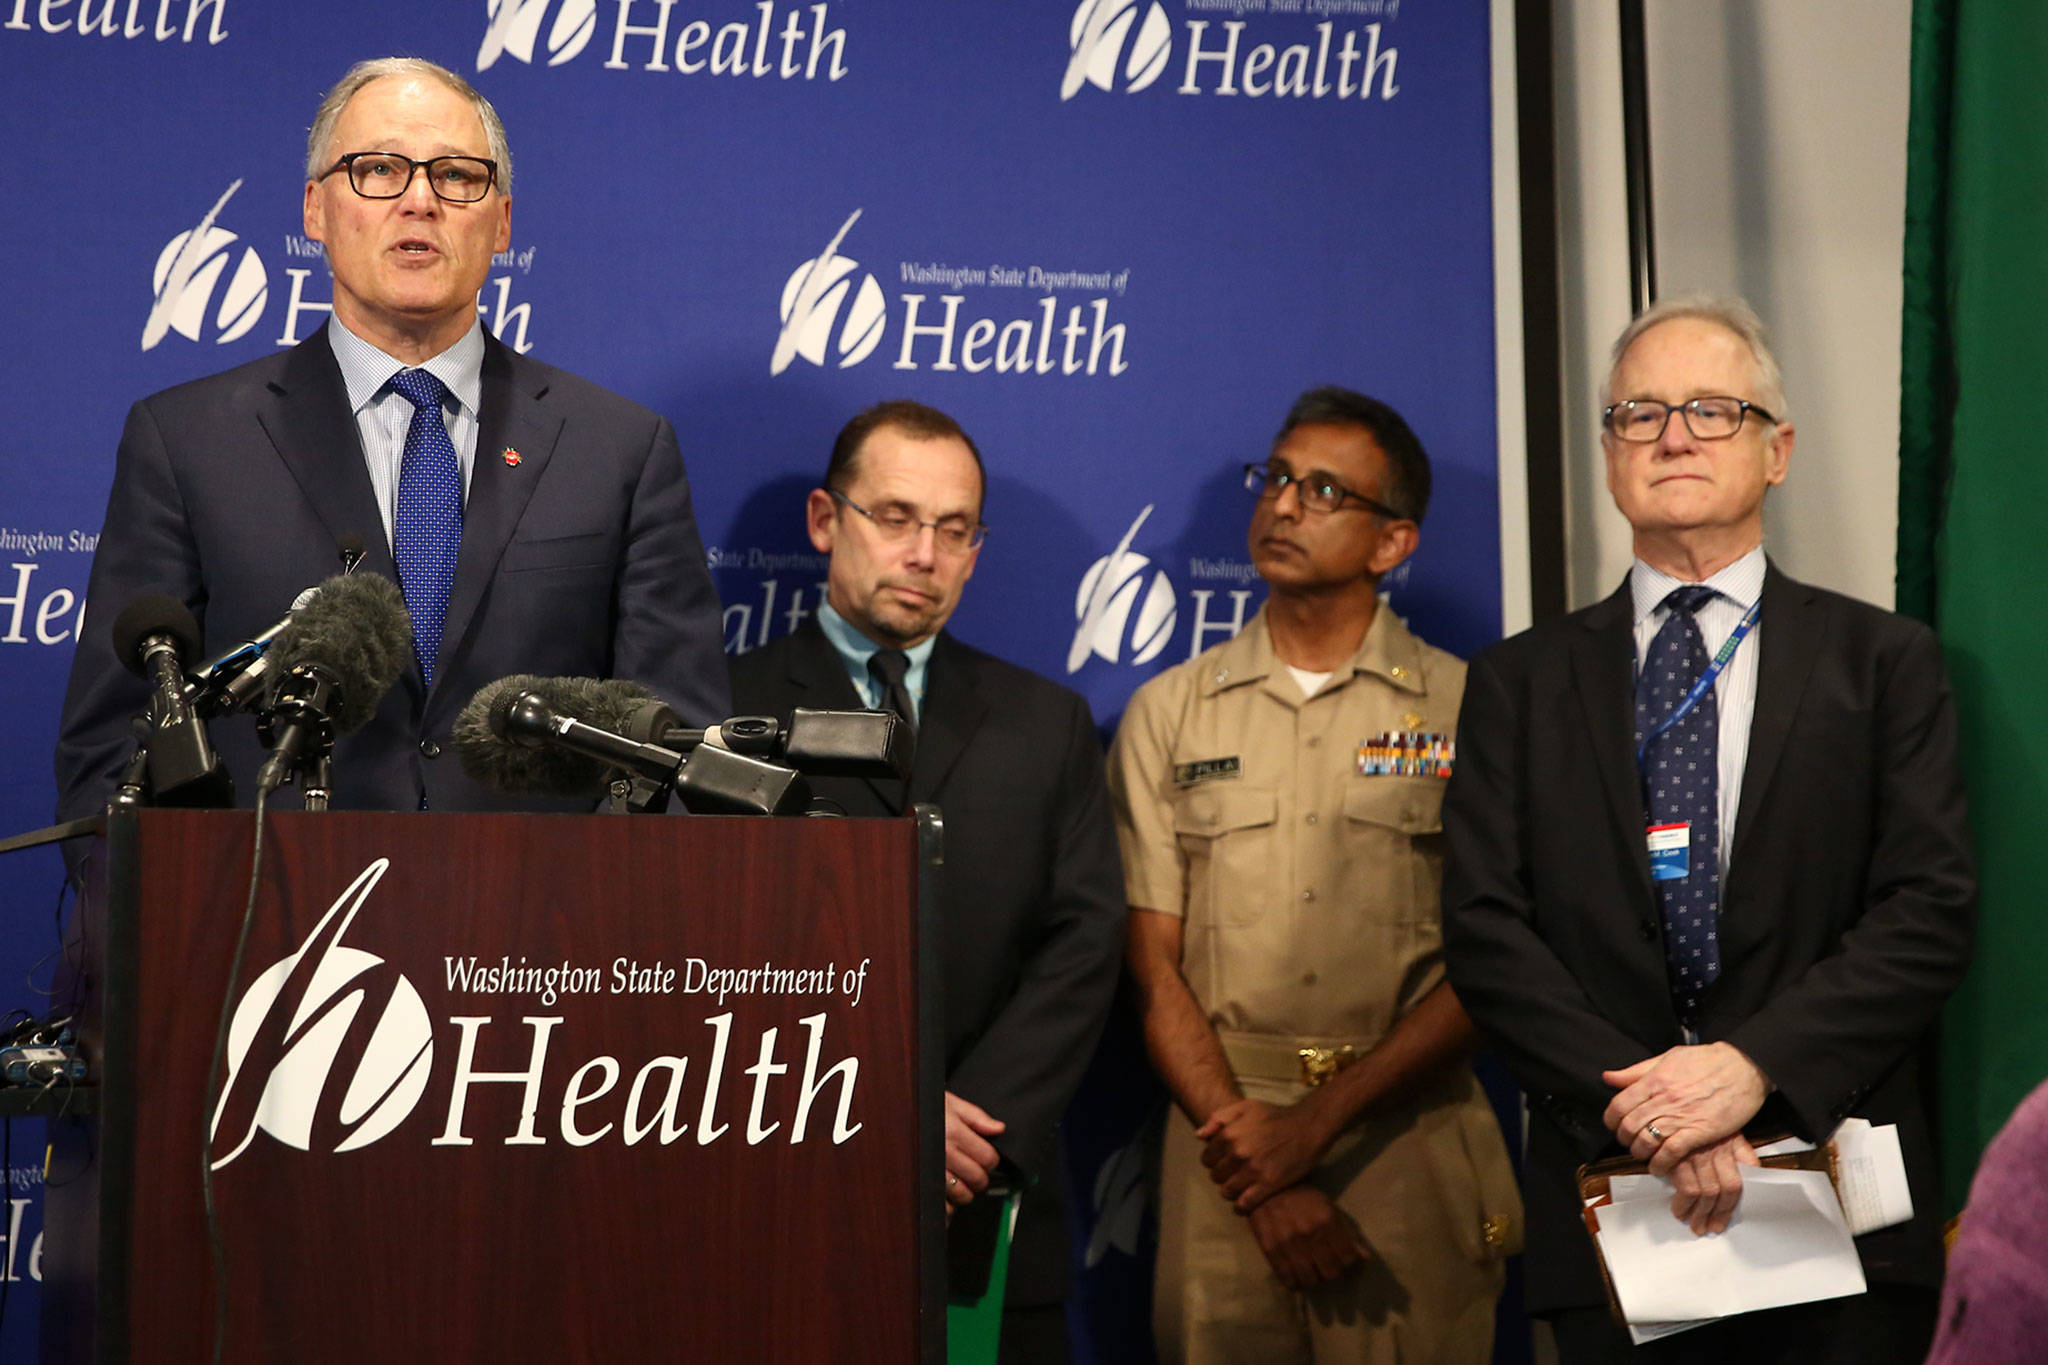 Gov. Jay Inslee opens a news conference Tuesday afternoon at the state Public Health Laboratories in Shoreline. (Kevin Clark / The Herald)